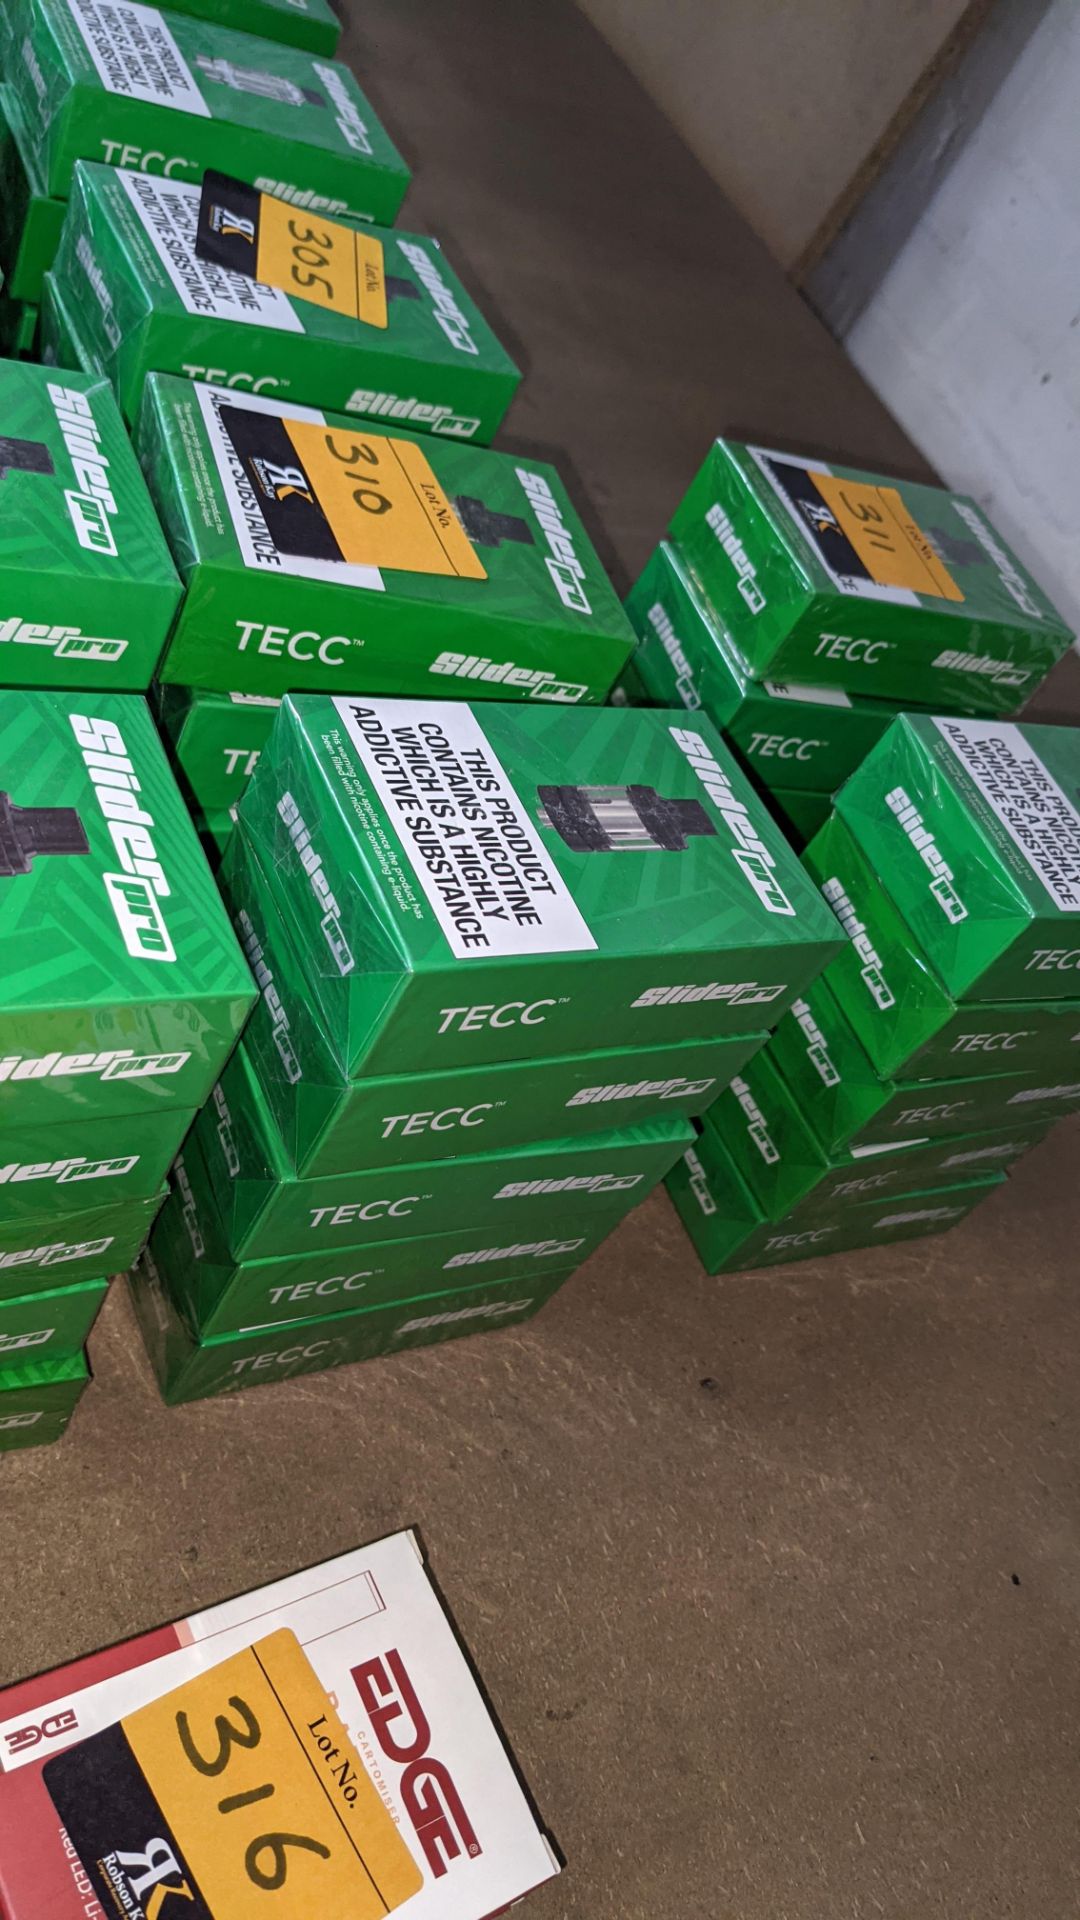 10 off TECC Slider Pro tanks/heads, each one consisting of a box with a 2mm Slider Pro tank plus 2 o - Image 3 of 3